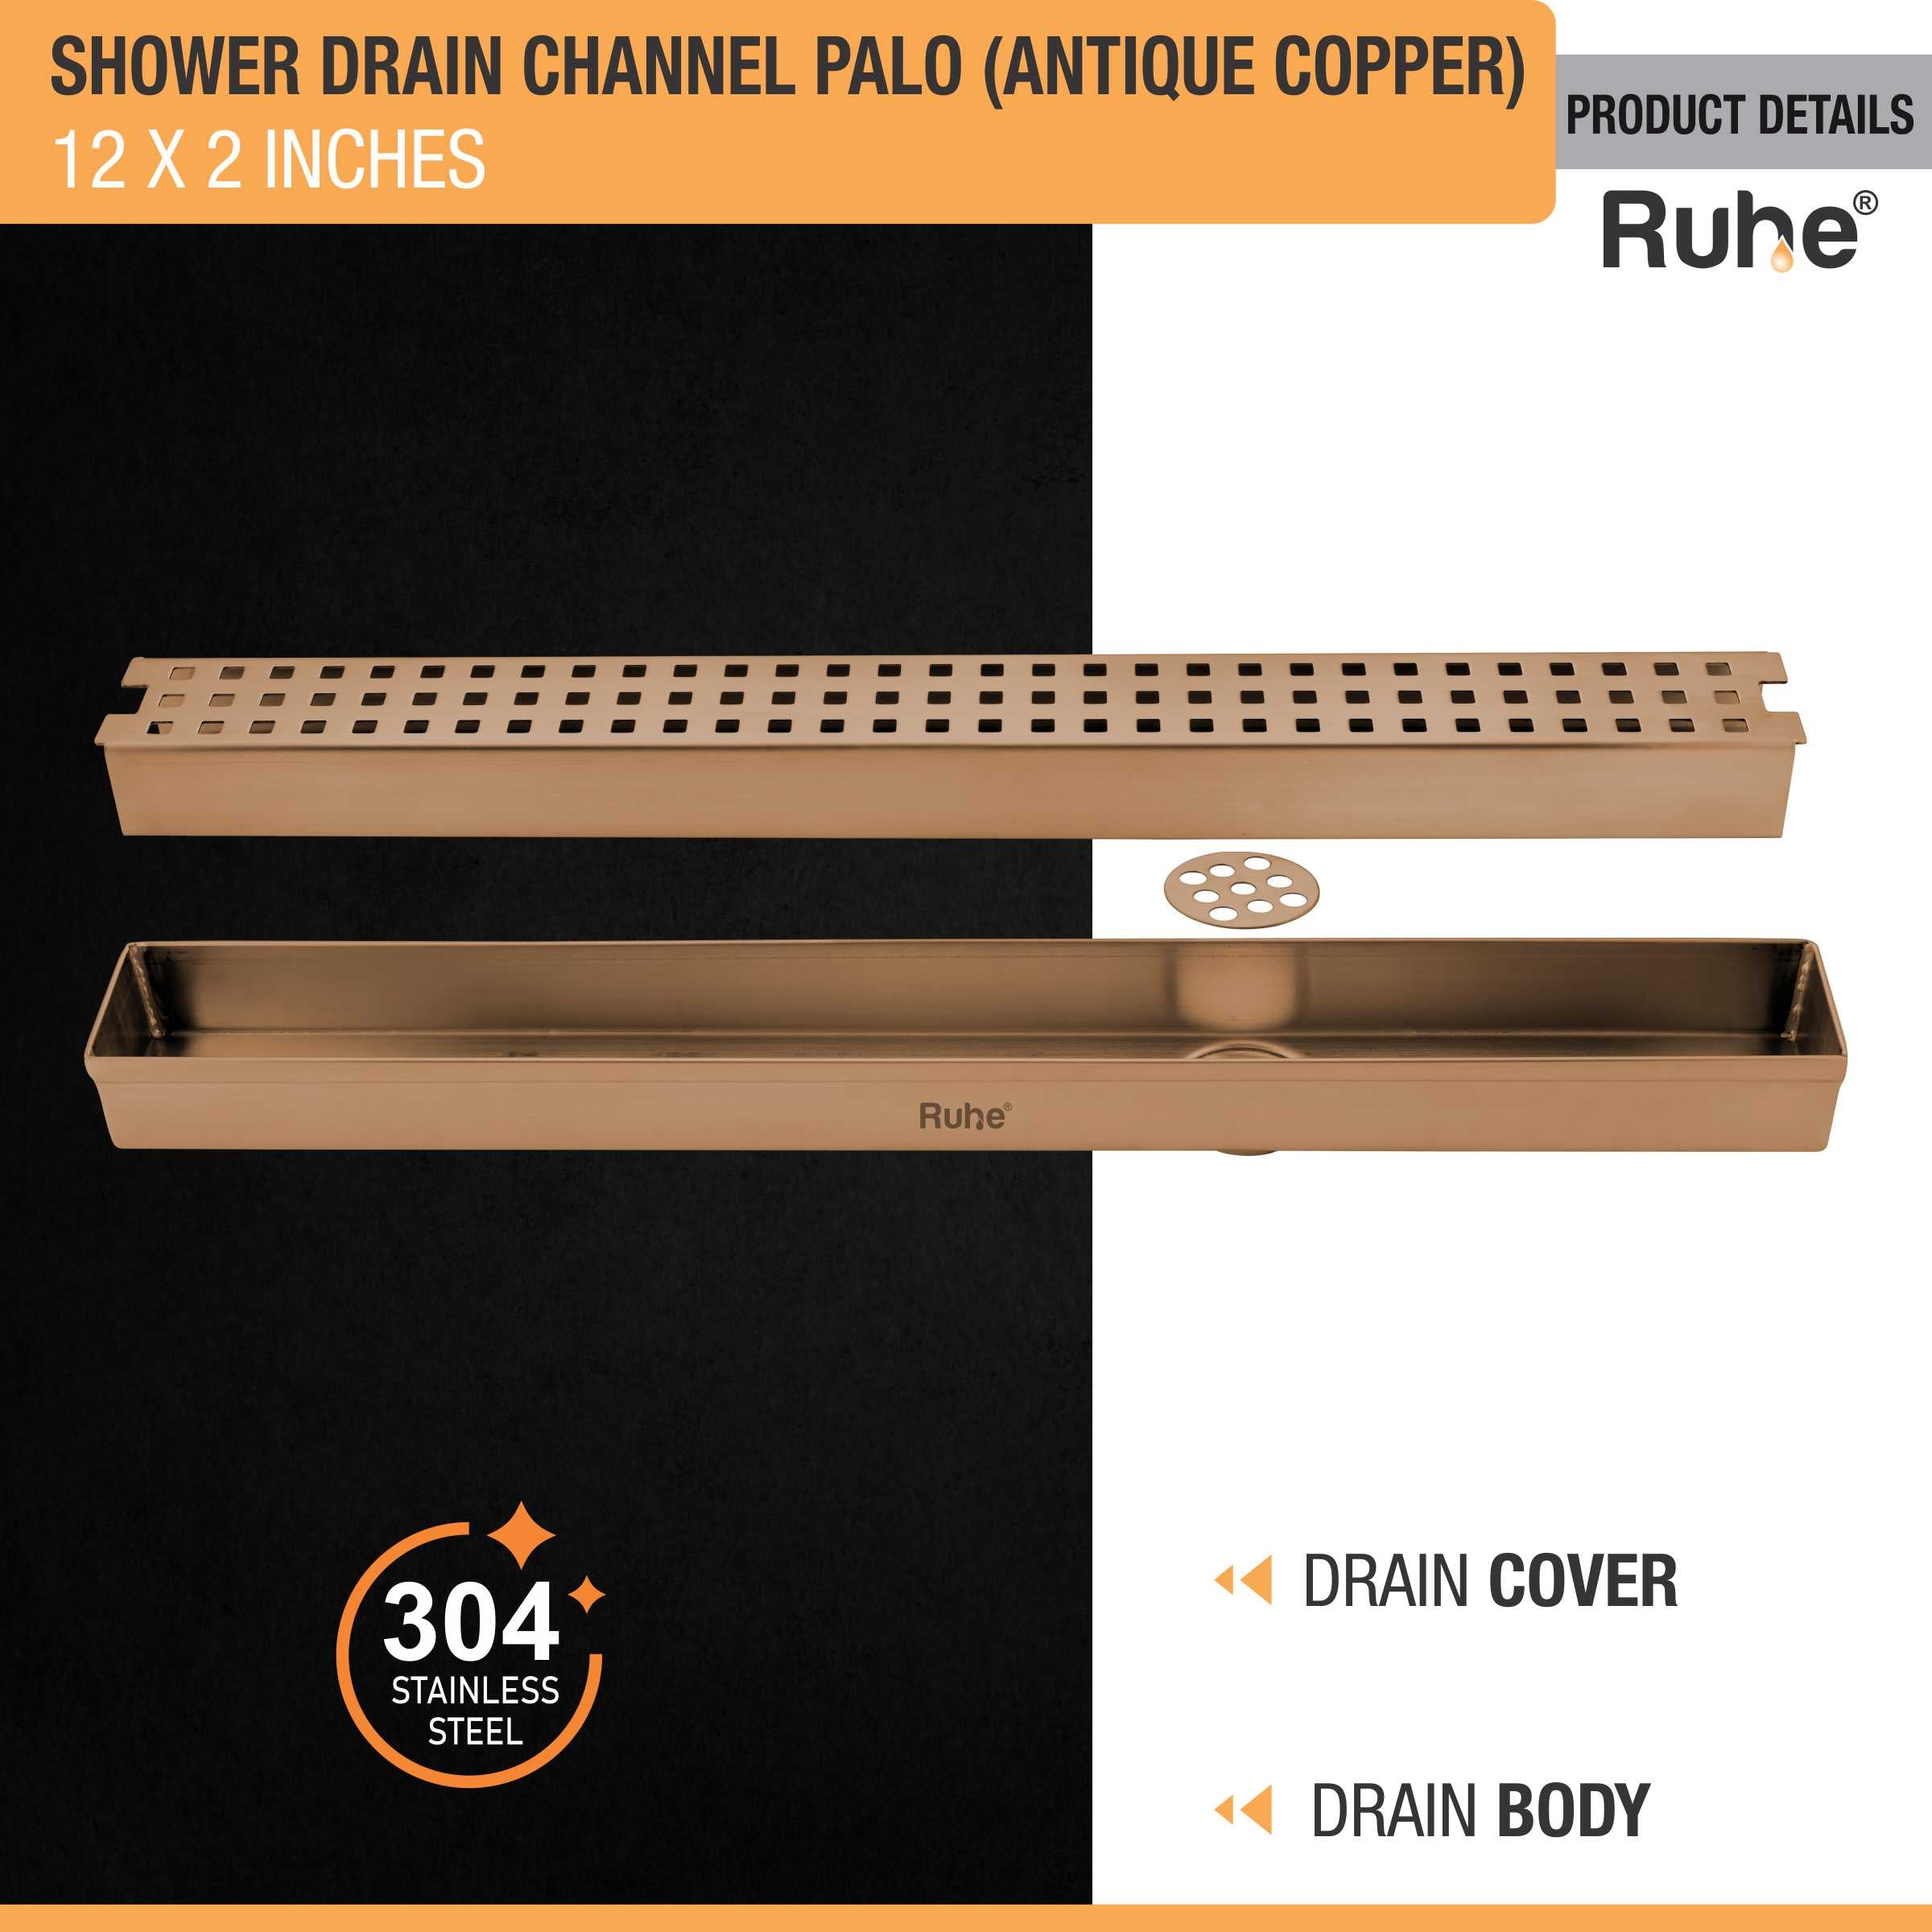 Palo Shower Drain Channel (12 x 2 Inches) ROSE GOLD/ANTIQUE COPPER product details